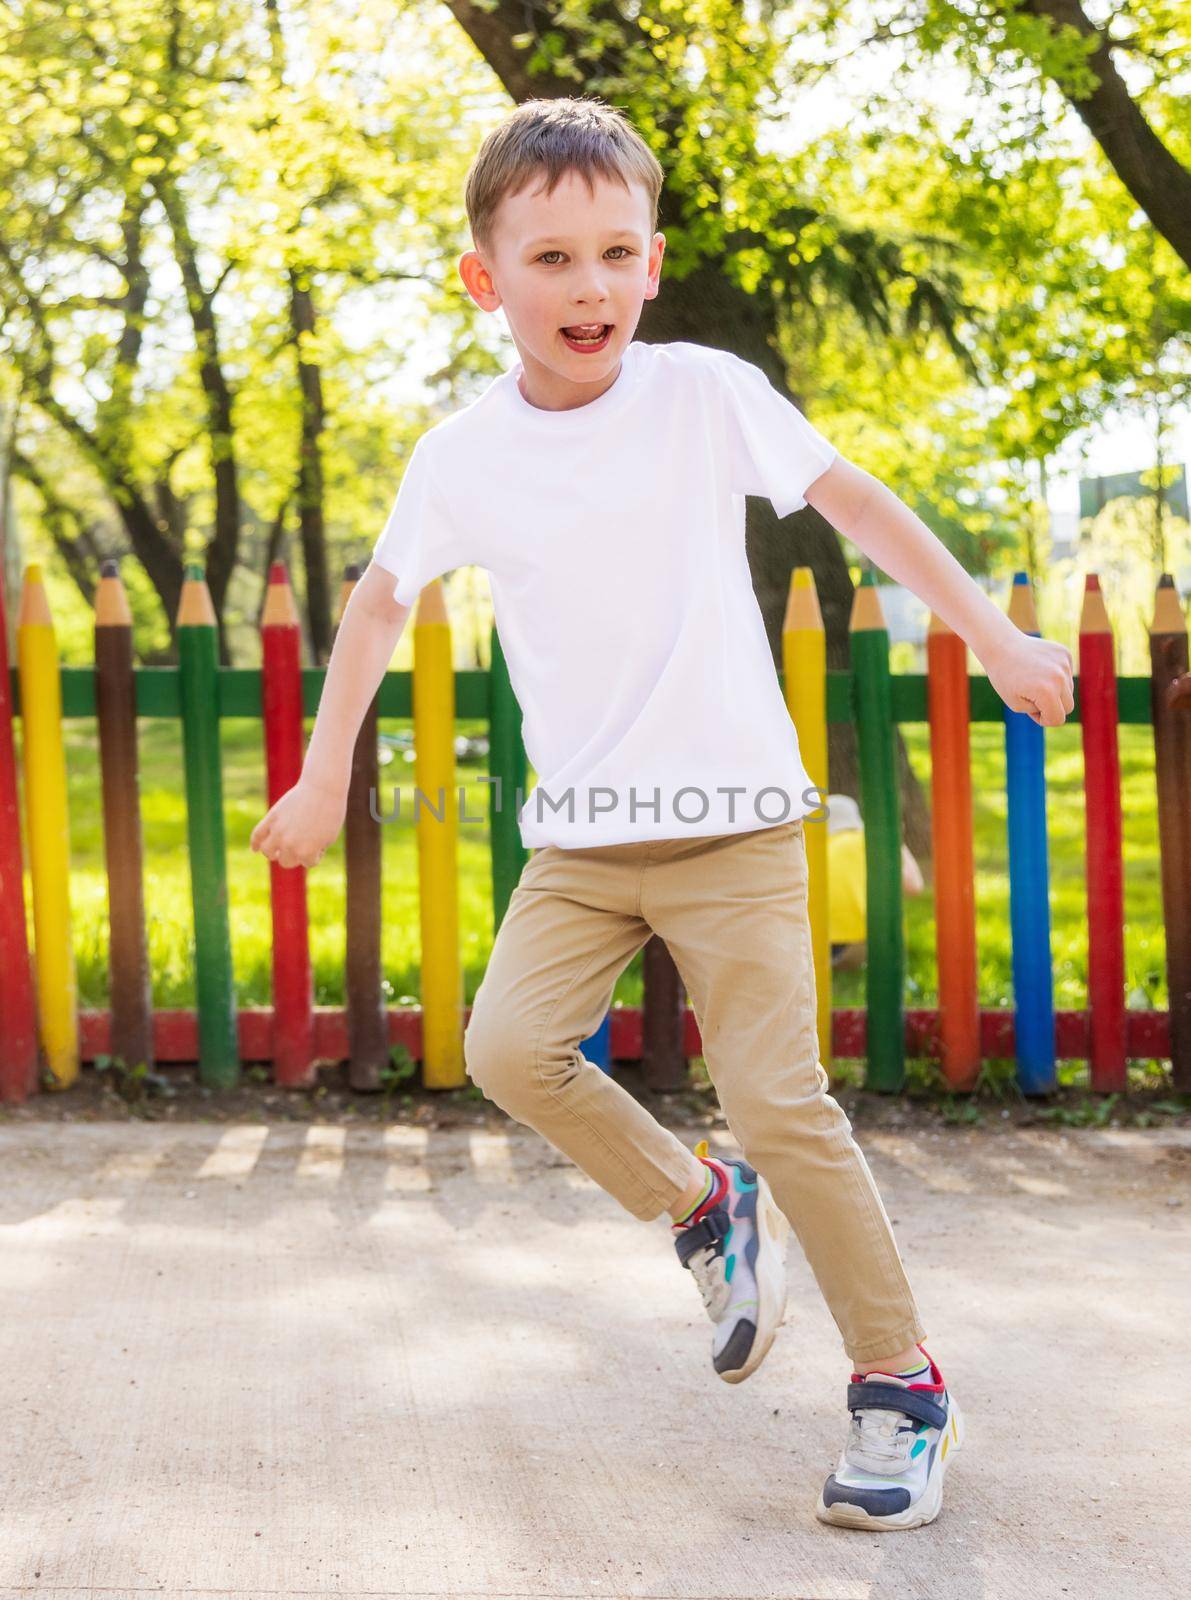 mockup, template. A cheerful boy in a white T-shirt is dancing in the park by Ramanouskaya